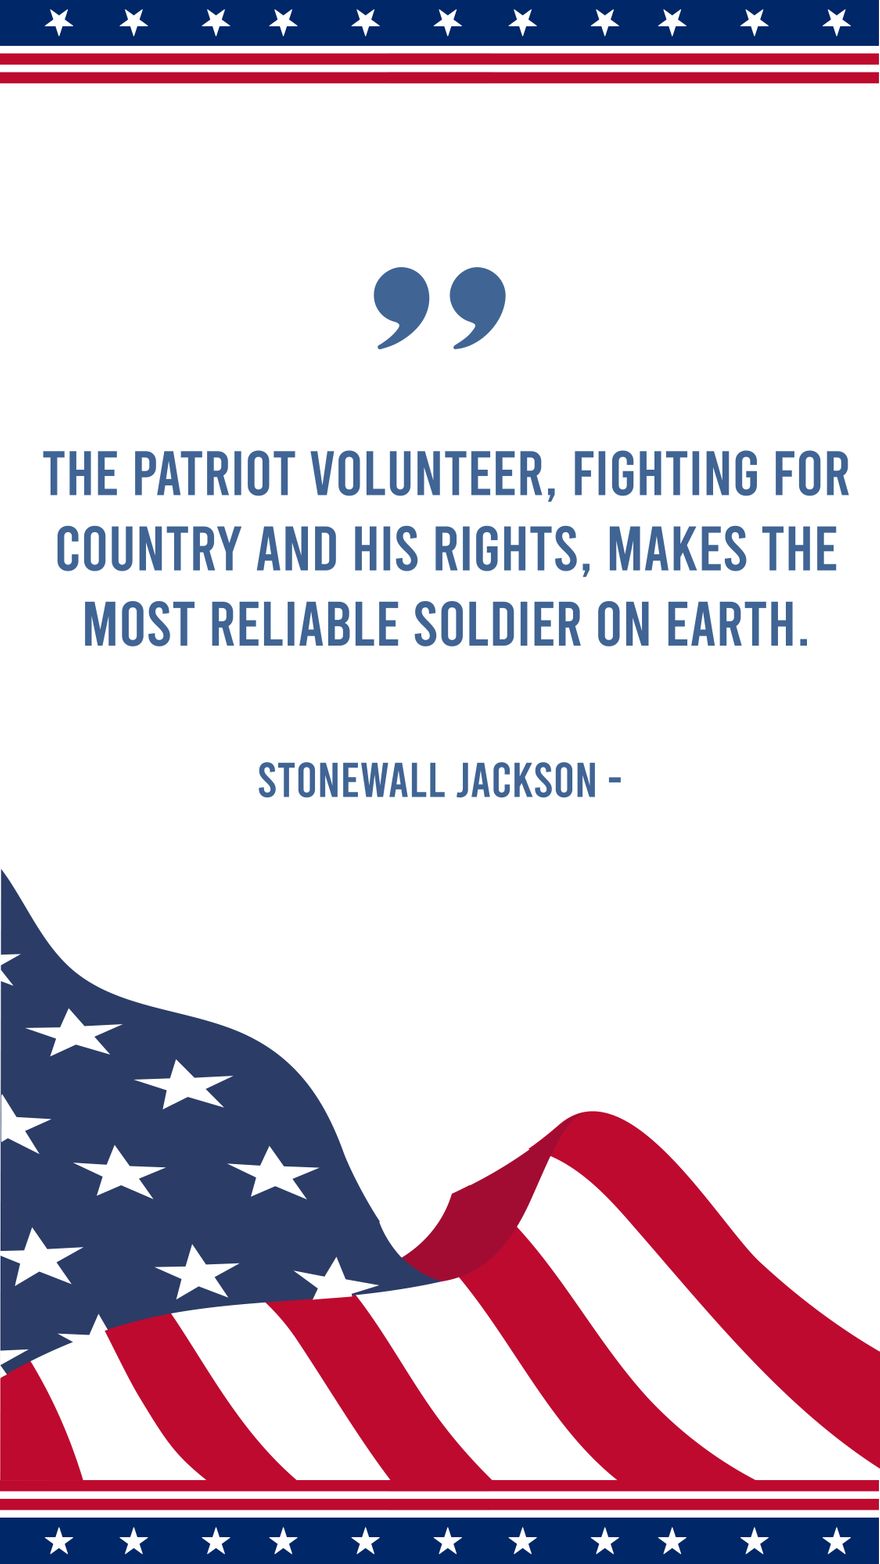 Stonewall Jackson - The patriot volunteer, fighting for country and his rights, makes the most reliable soldier on earth. in JPG